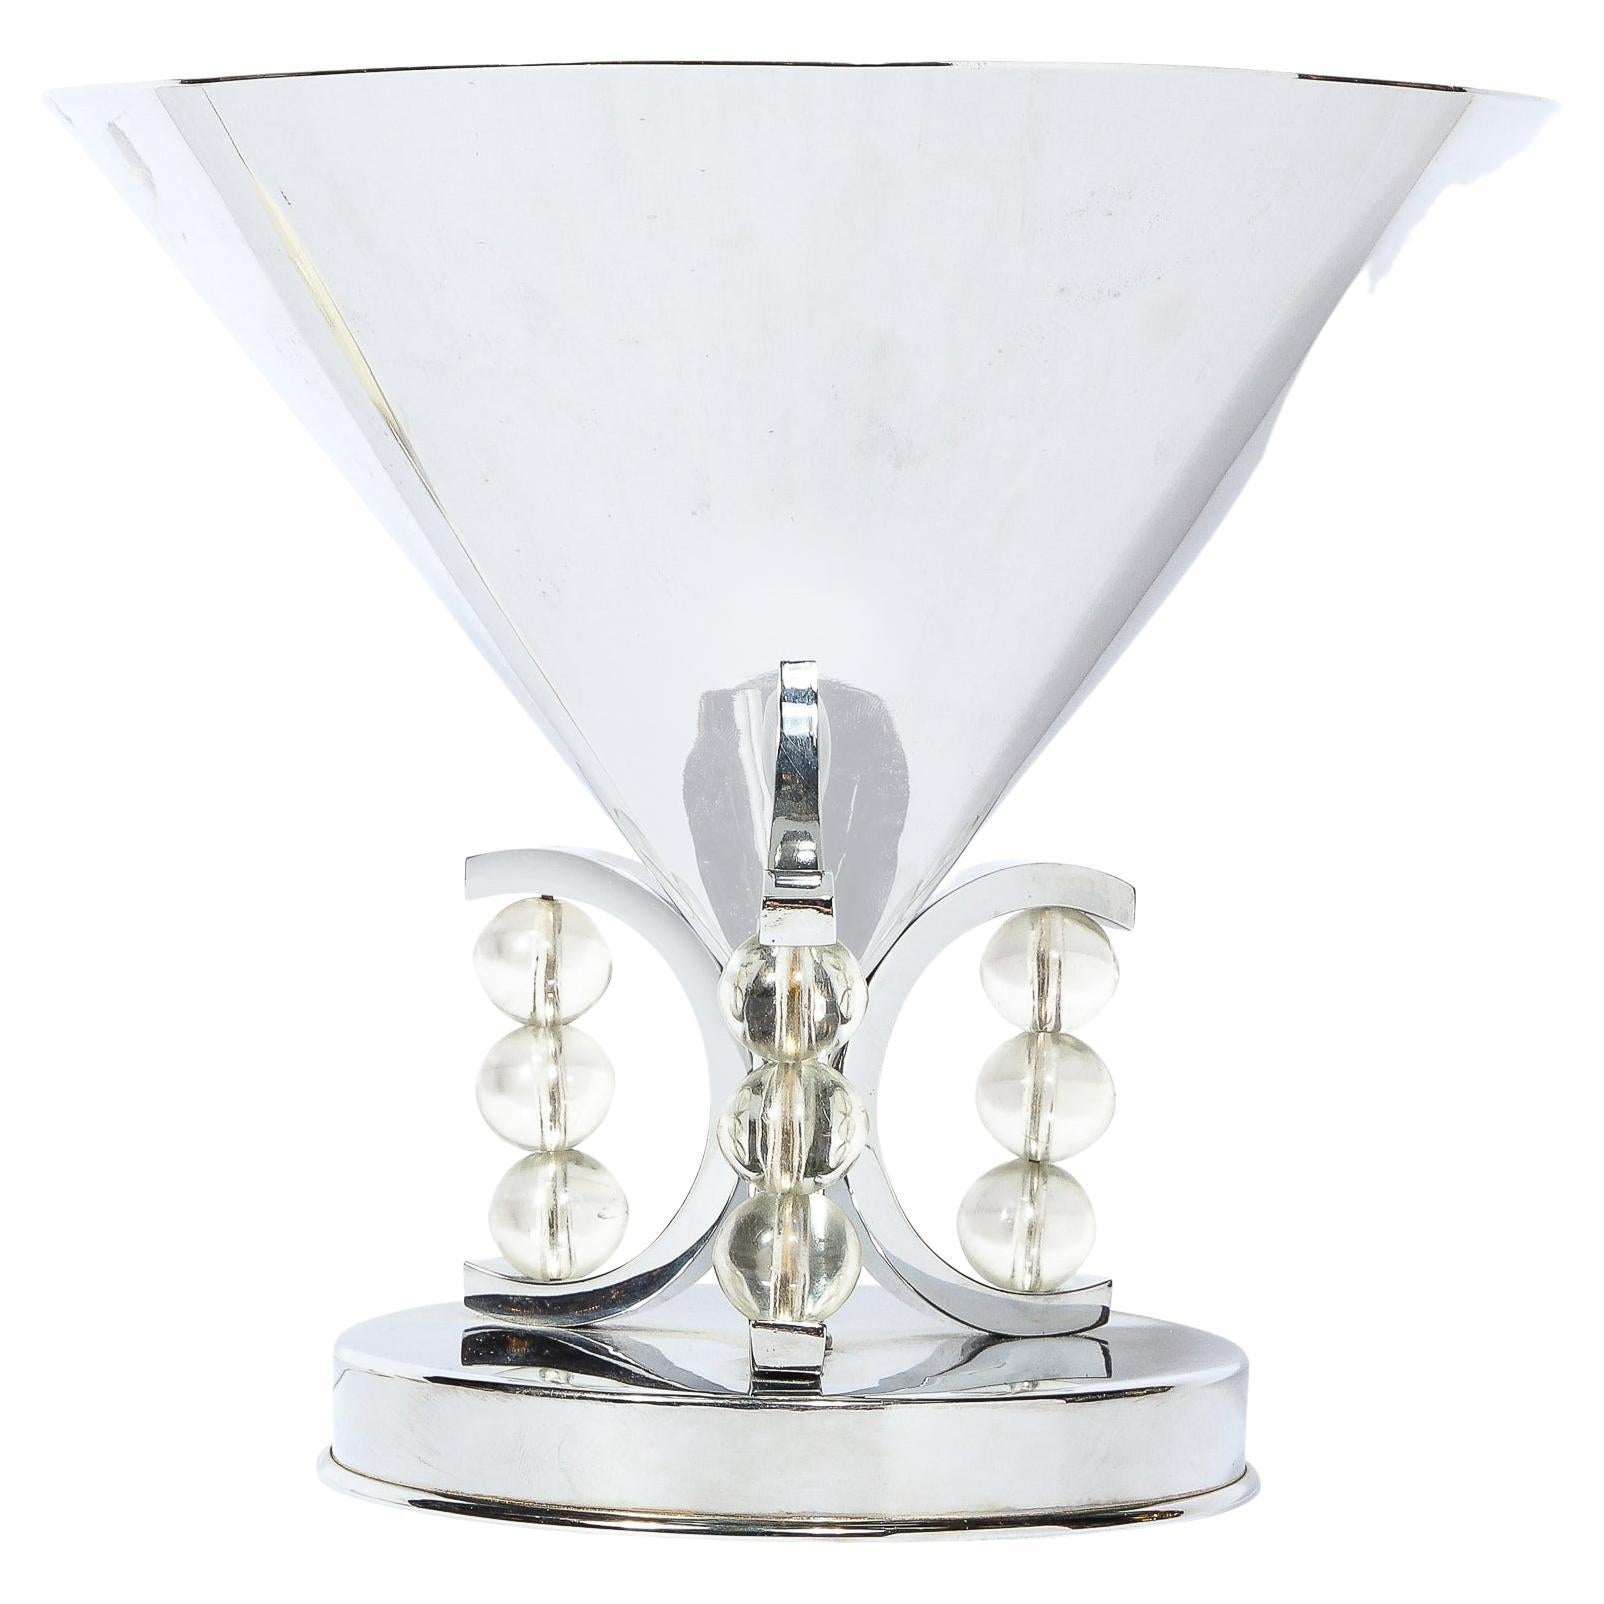 Art Deco Conical Uplight Table Lamp in Chrome with Stacked Glass Ball Detailing